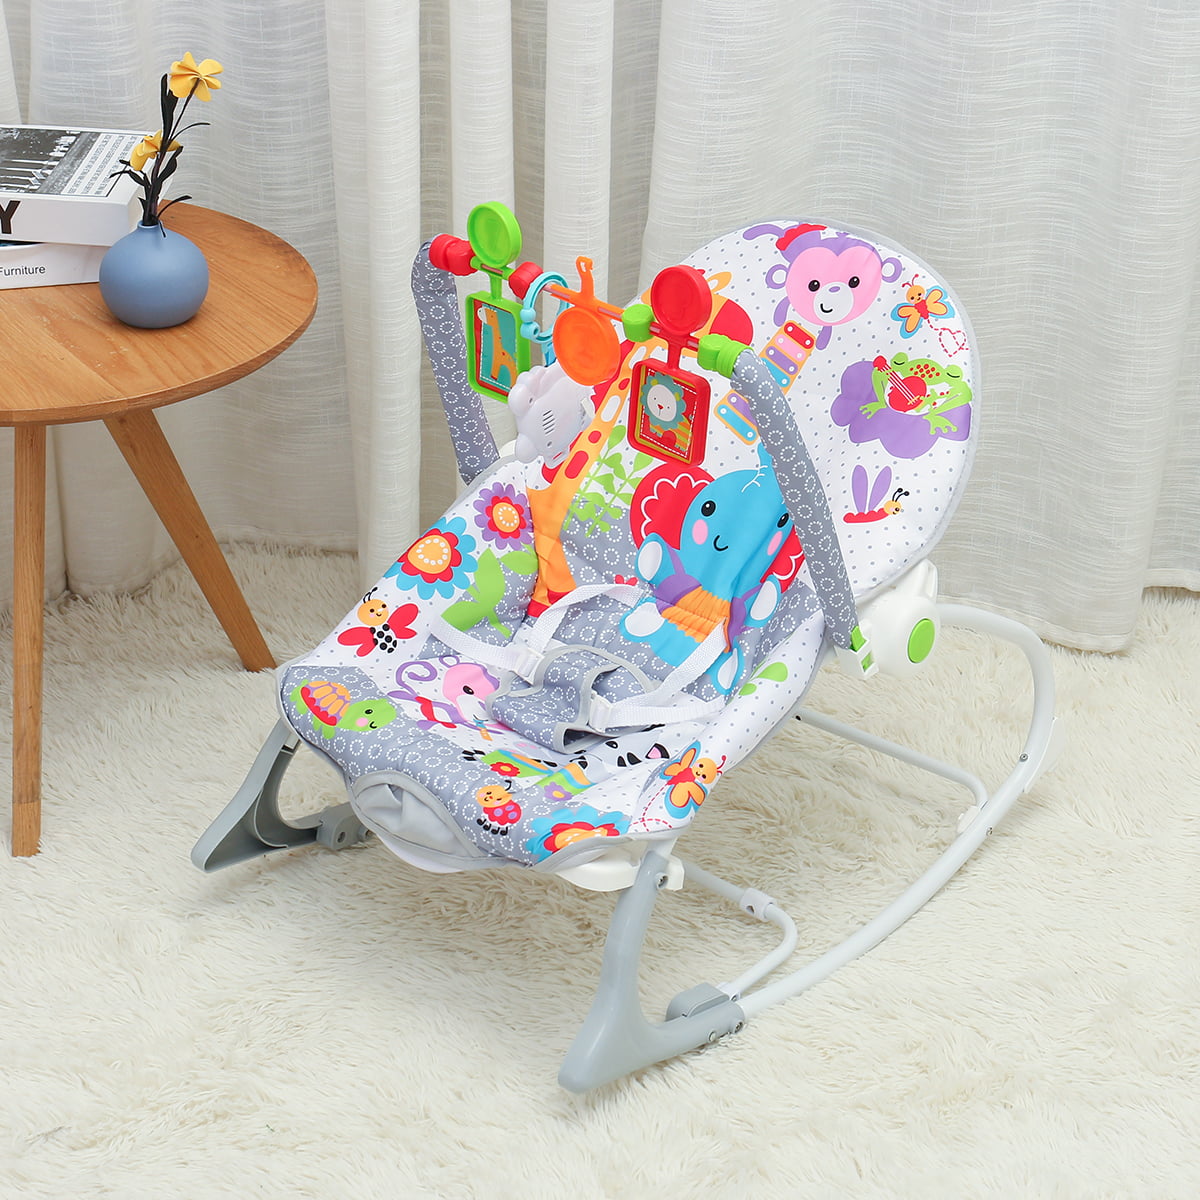 OKBOP Infant-to-Toddler Rocker Chair Boy Girl Activity Center Portable Music Baby Swing Cradle with Soft Cushion Safety Strap Multicolour Folding 2 in 1 Bouncer Seat Dinning Table Chairs Set